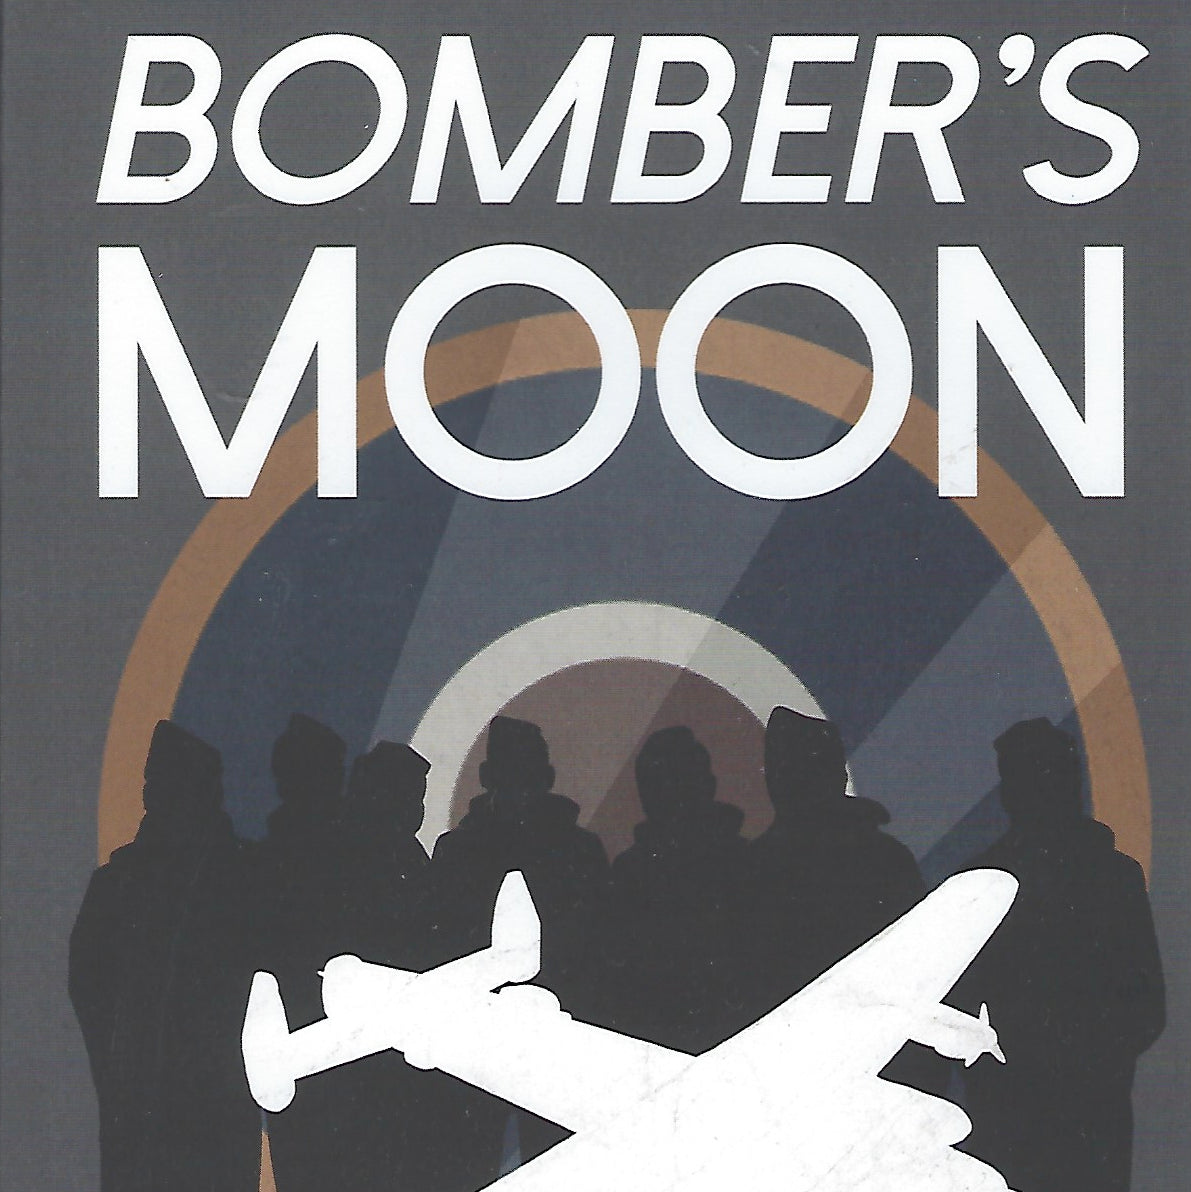 Bomber's Moon (by Grant Patterson)